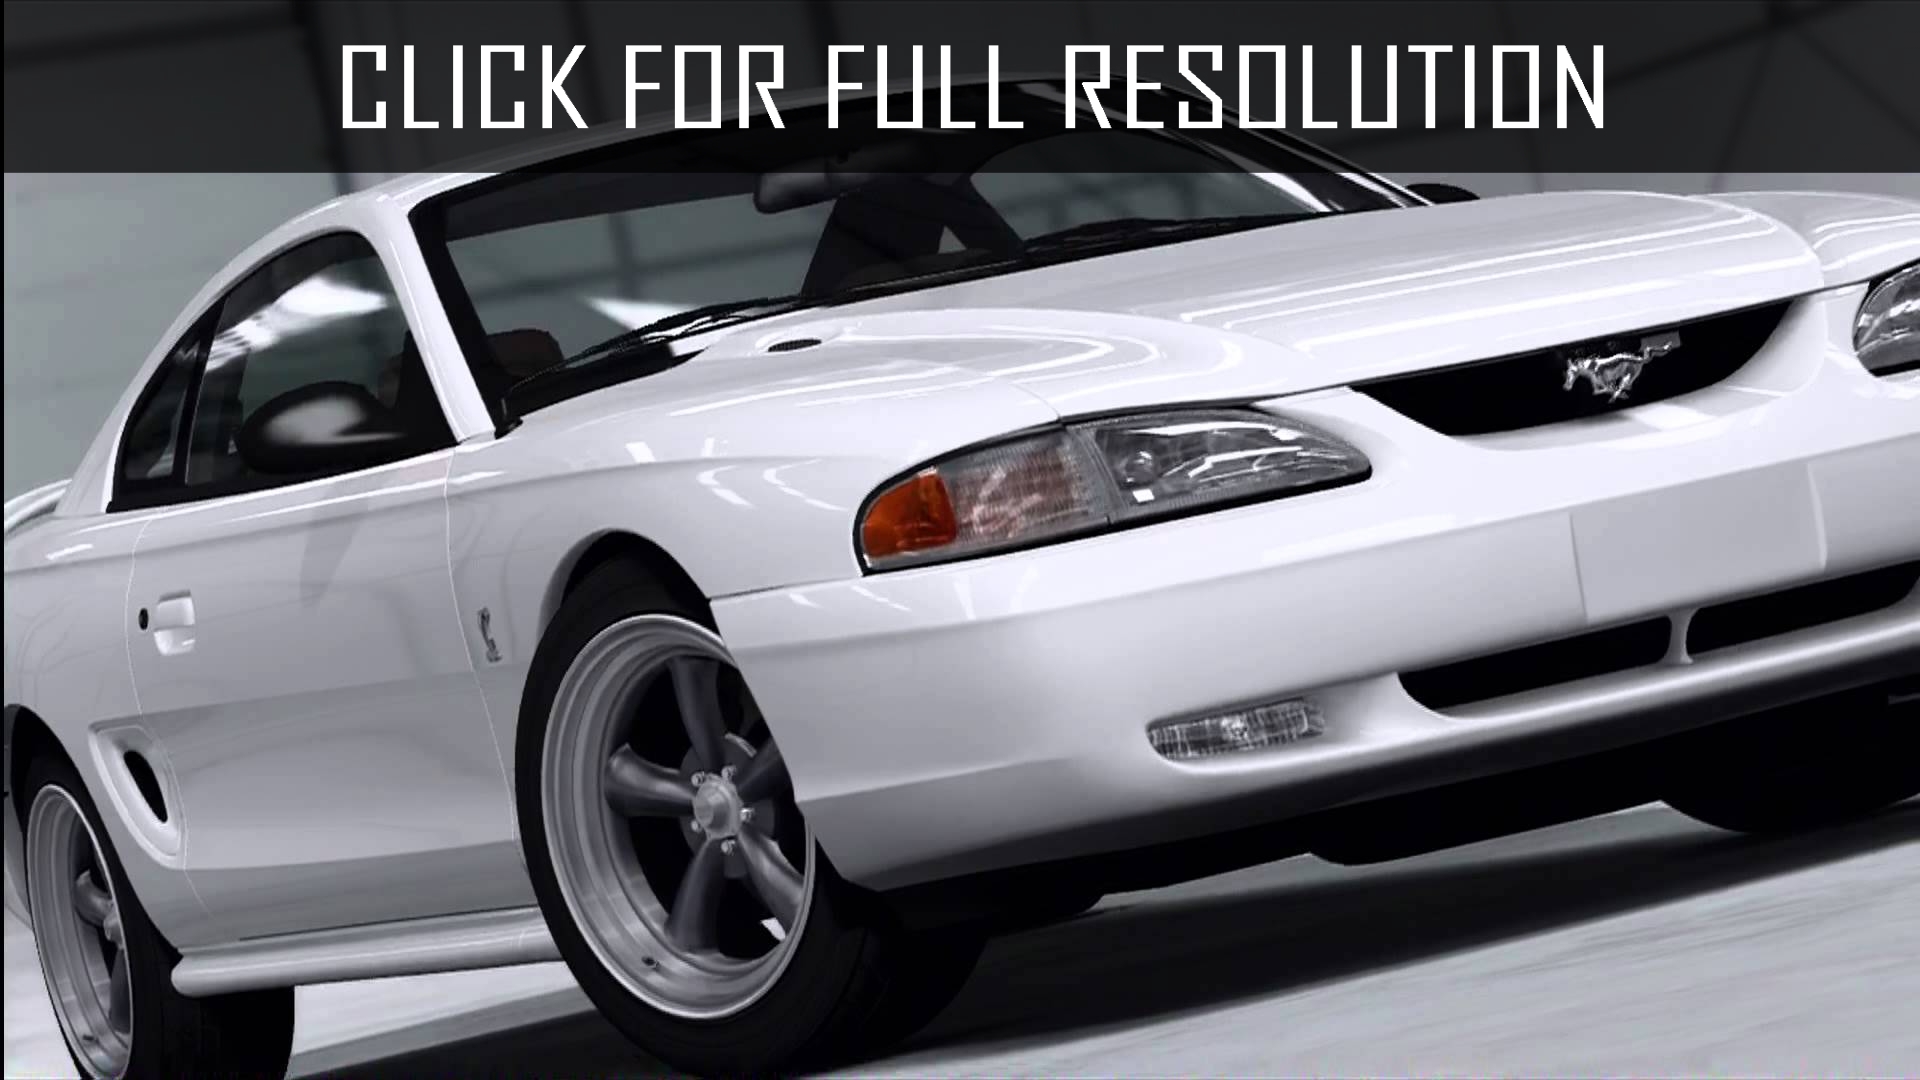 1995 Ford Mustang Cobra Best Image Gallery 12 12 Share And Download